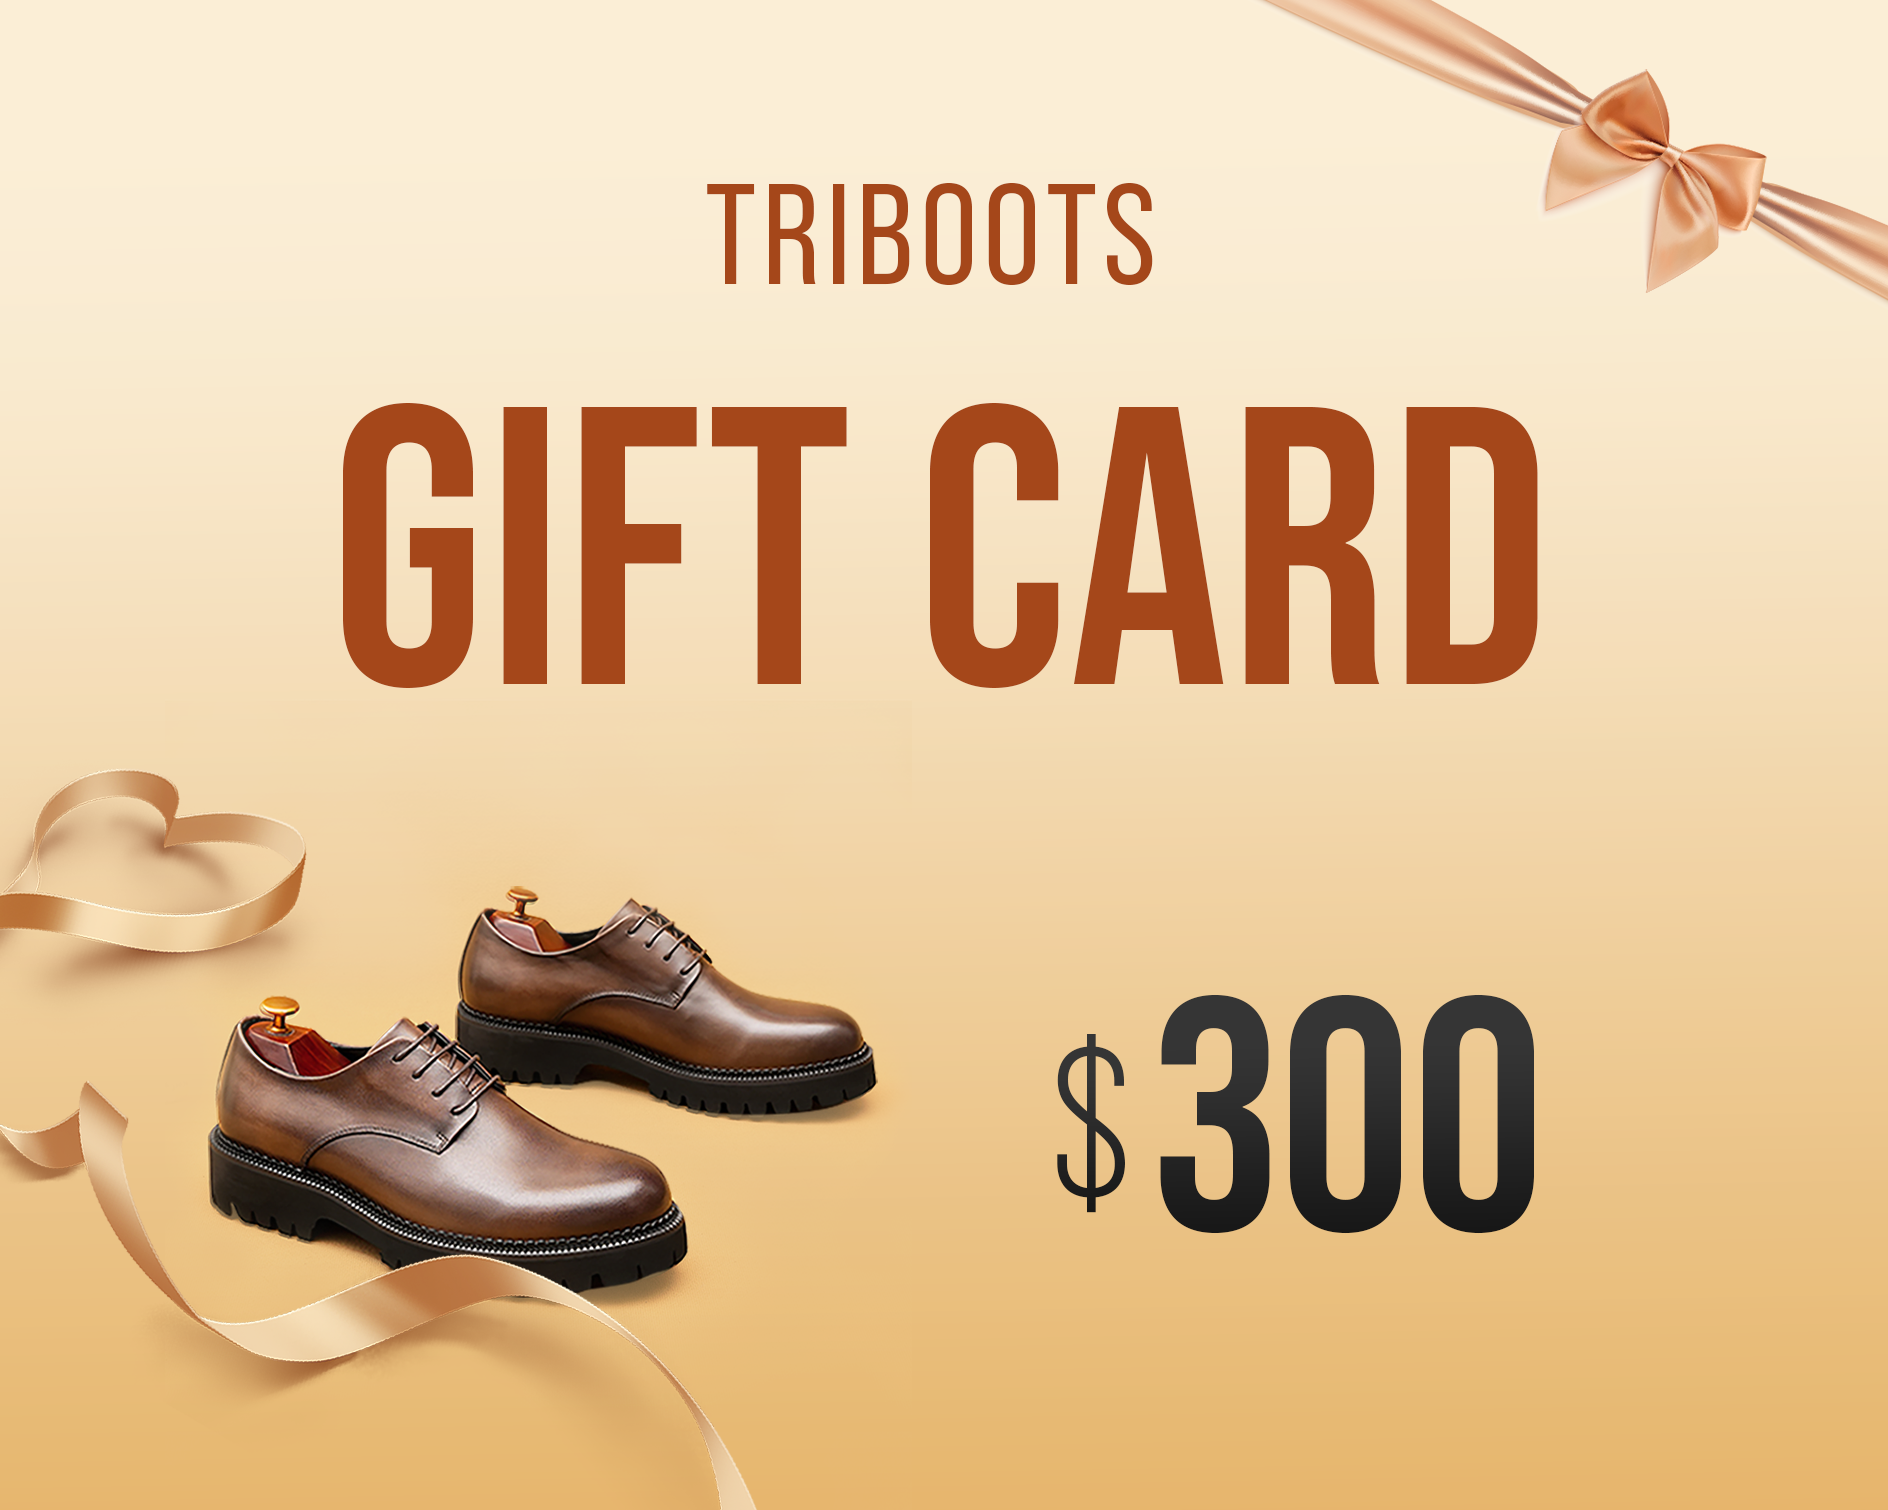 Assorted boots including fashion, vintage, and leather boots with Triboots Gift Card0